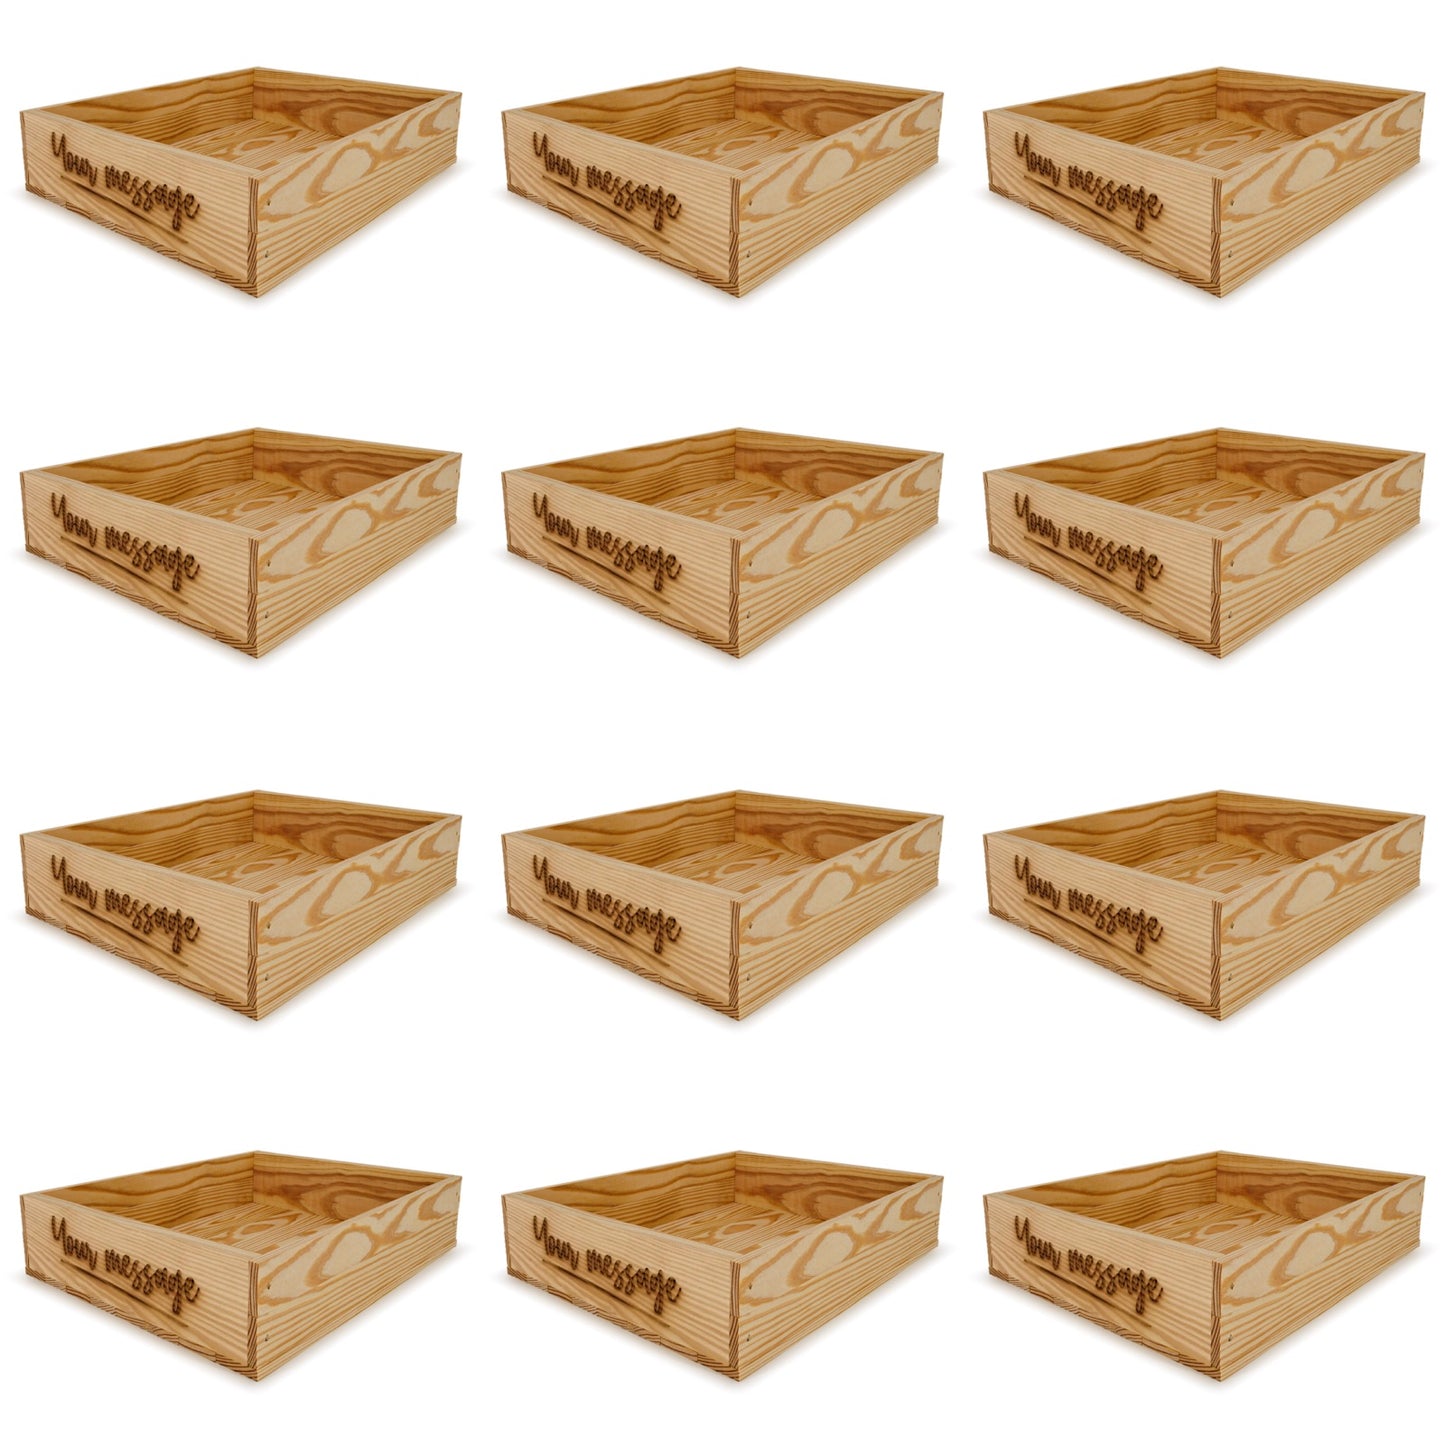 12 Small wooden crates with custom message 16x13.25x3.5